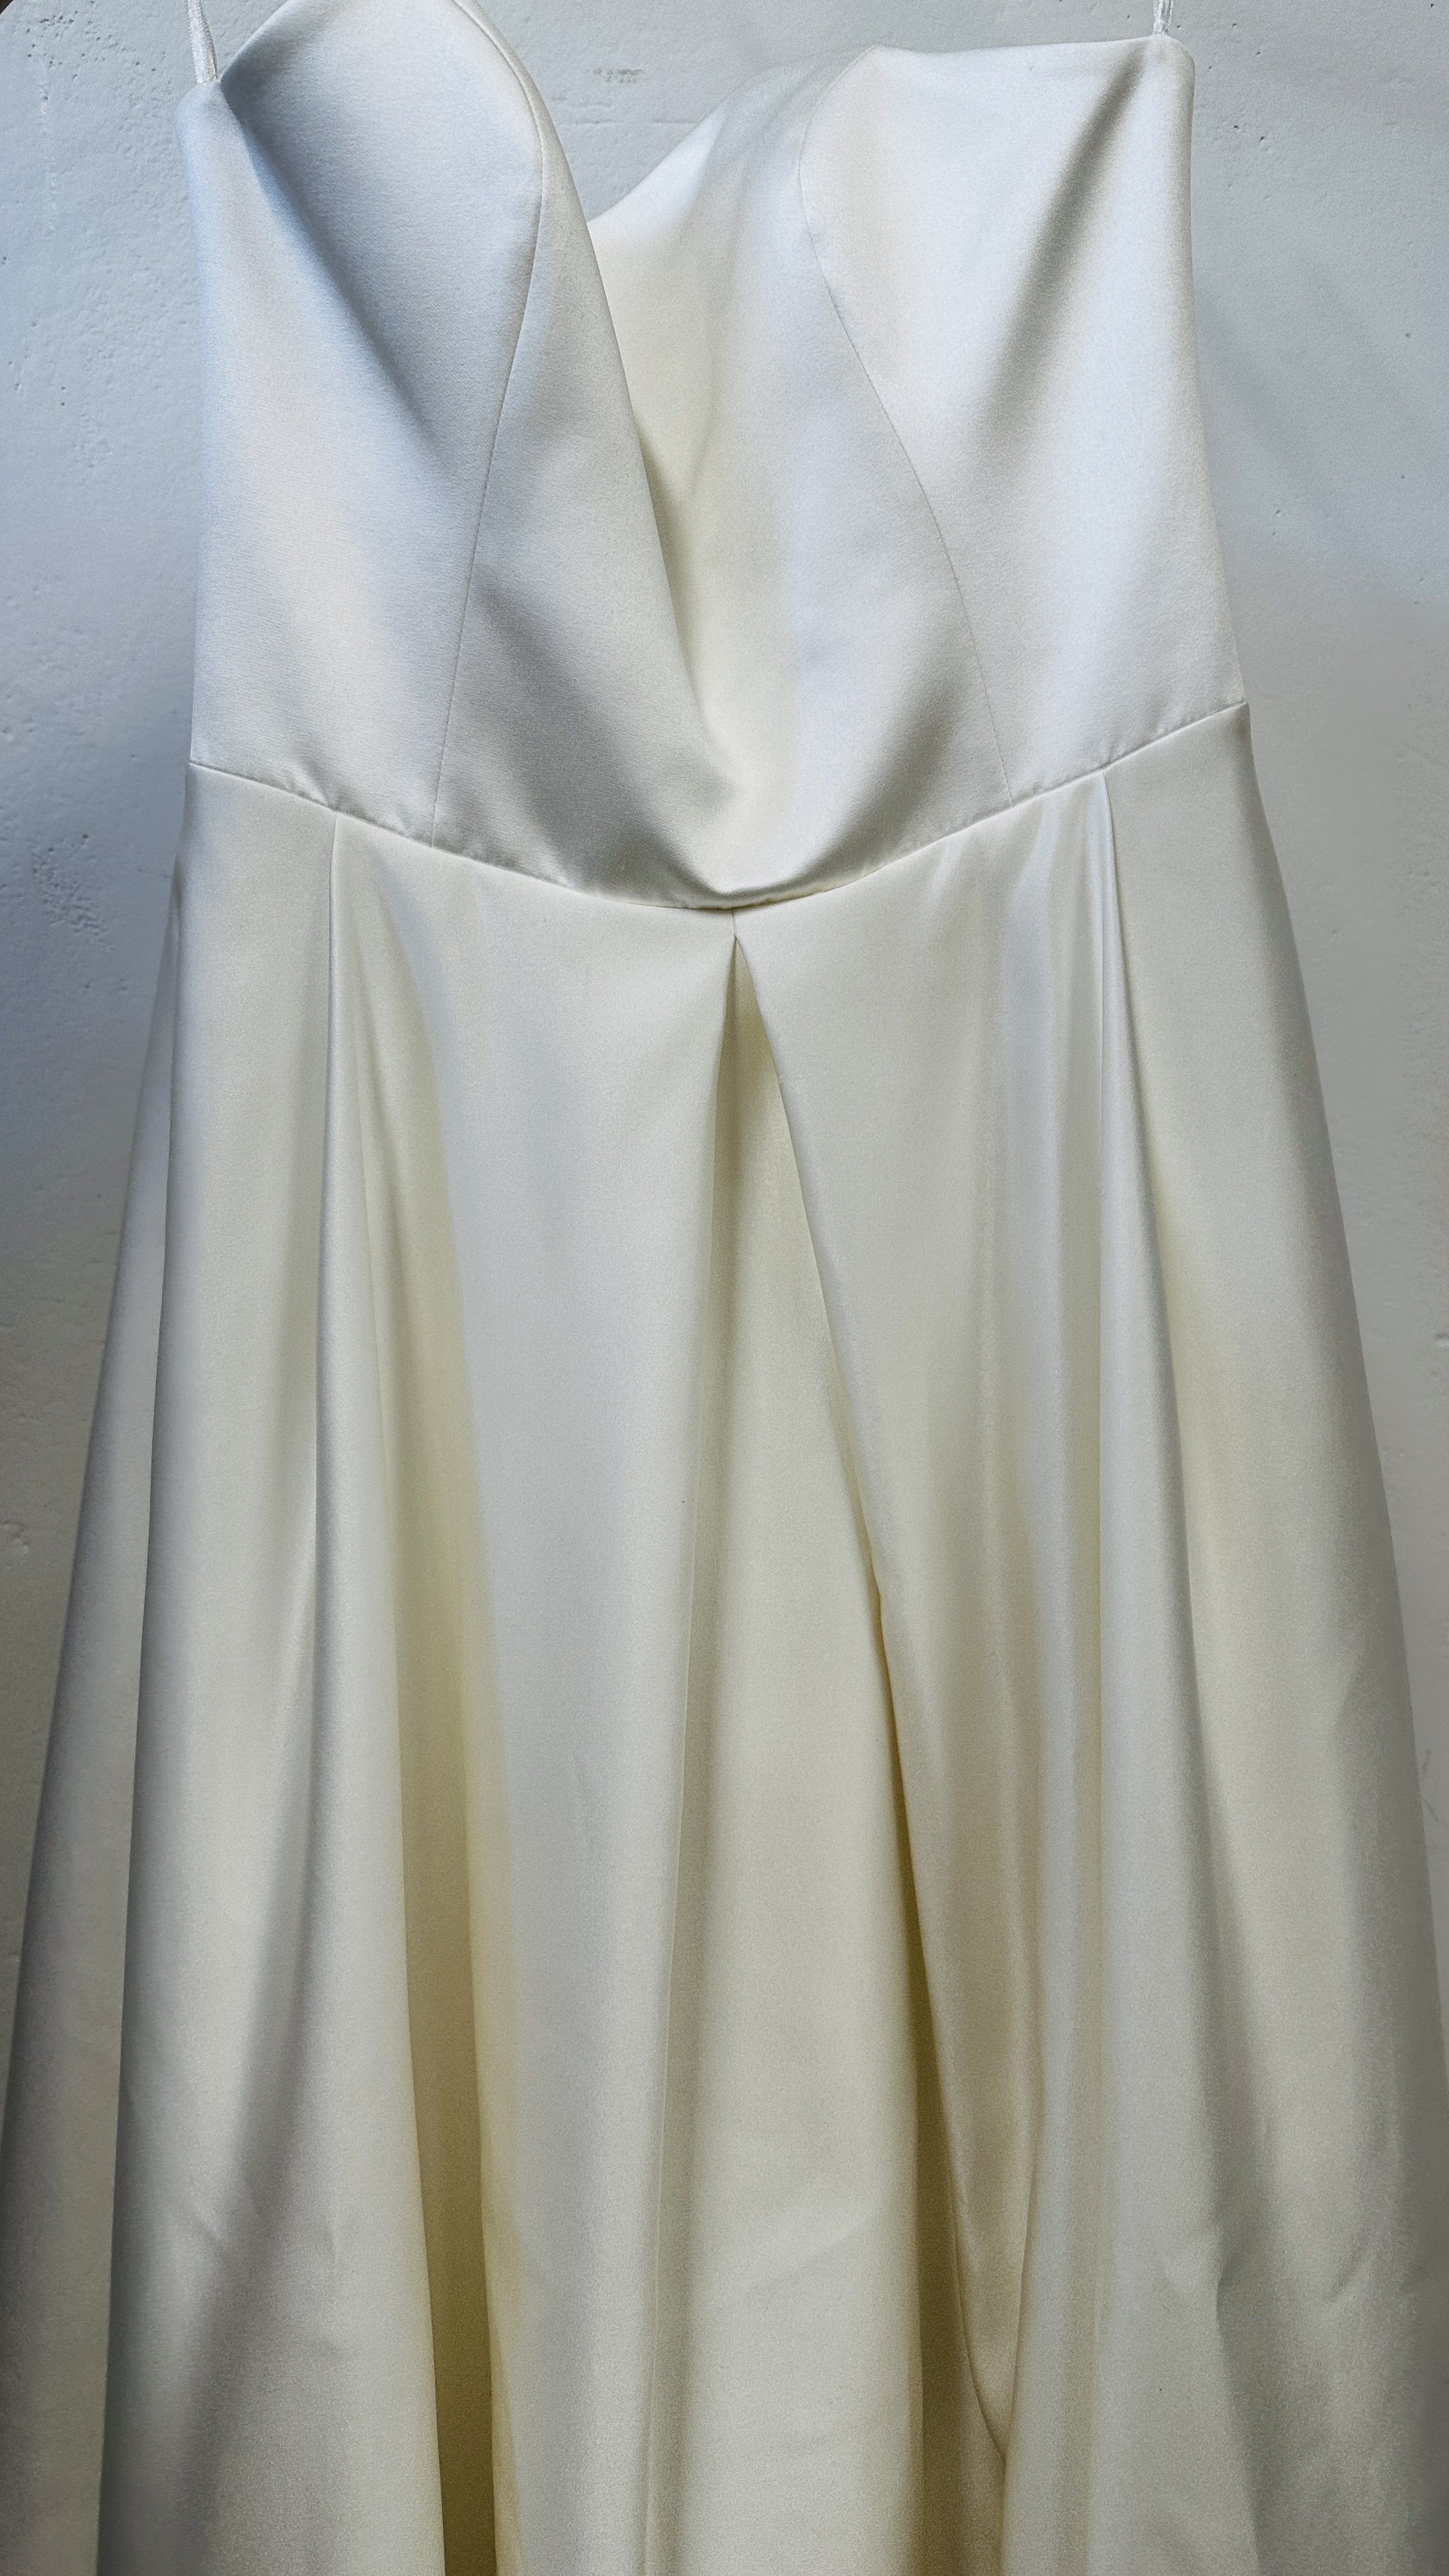 A "BIANCO EVENTO" WEDDING DRESS 40/L ALONG WITH TWO VEILS. - Image 2 of 11